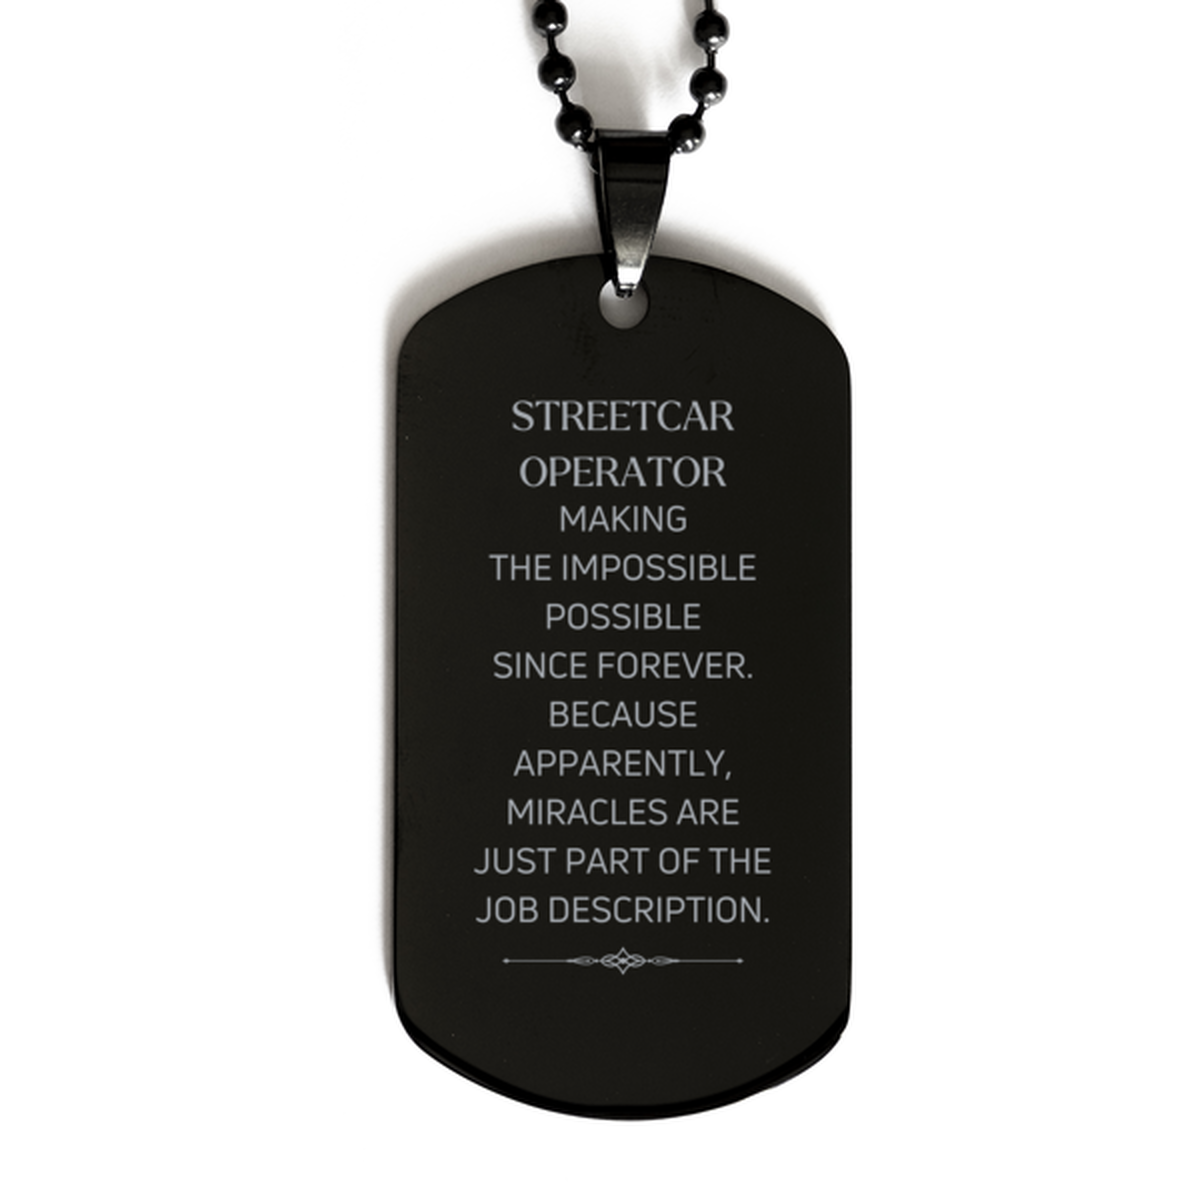 Funny Streetcar Operator Gifts, Miracles are just part of the job description, Inspirational Birthday Black Dog Tag For Streetcar Operator, Men, Women, Coworkers, Friends, Boss